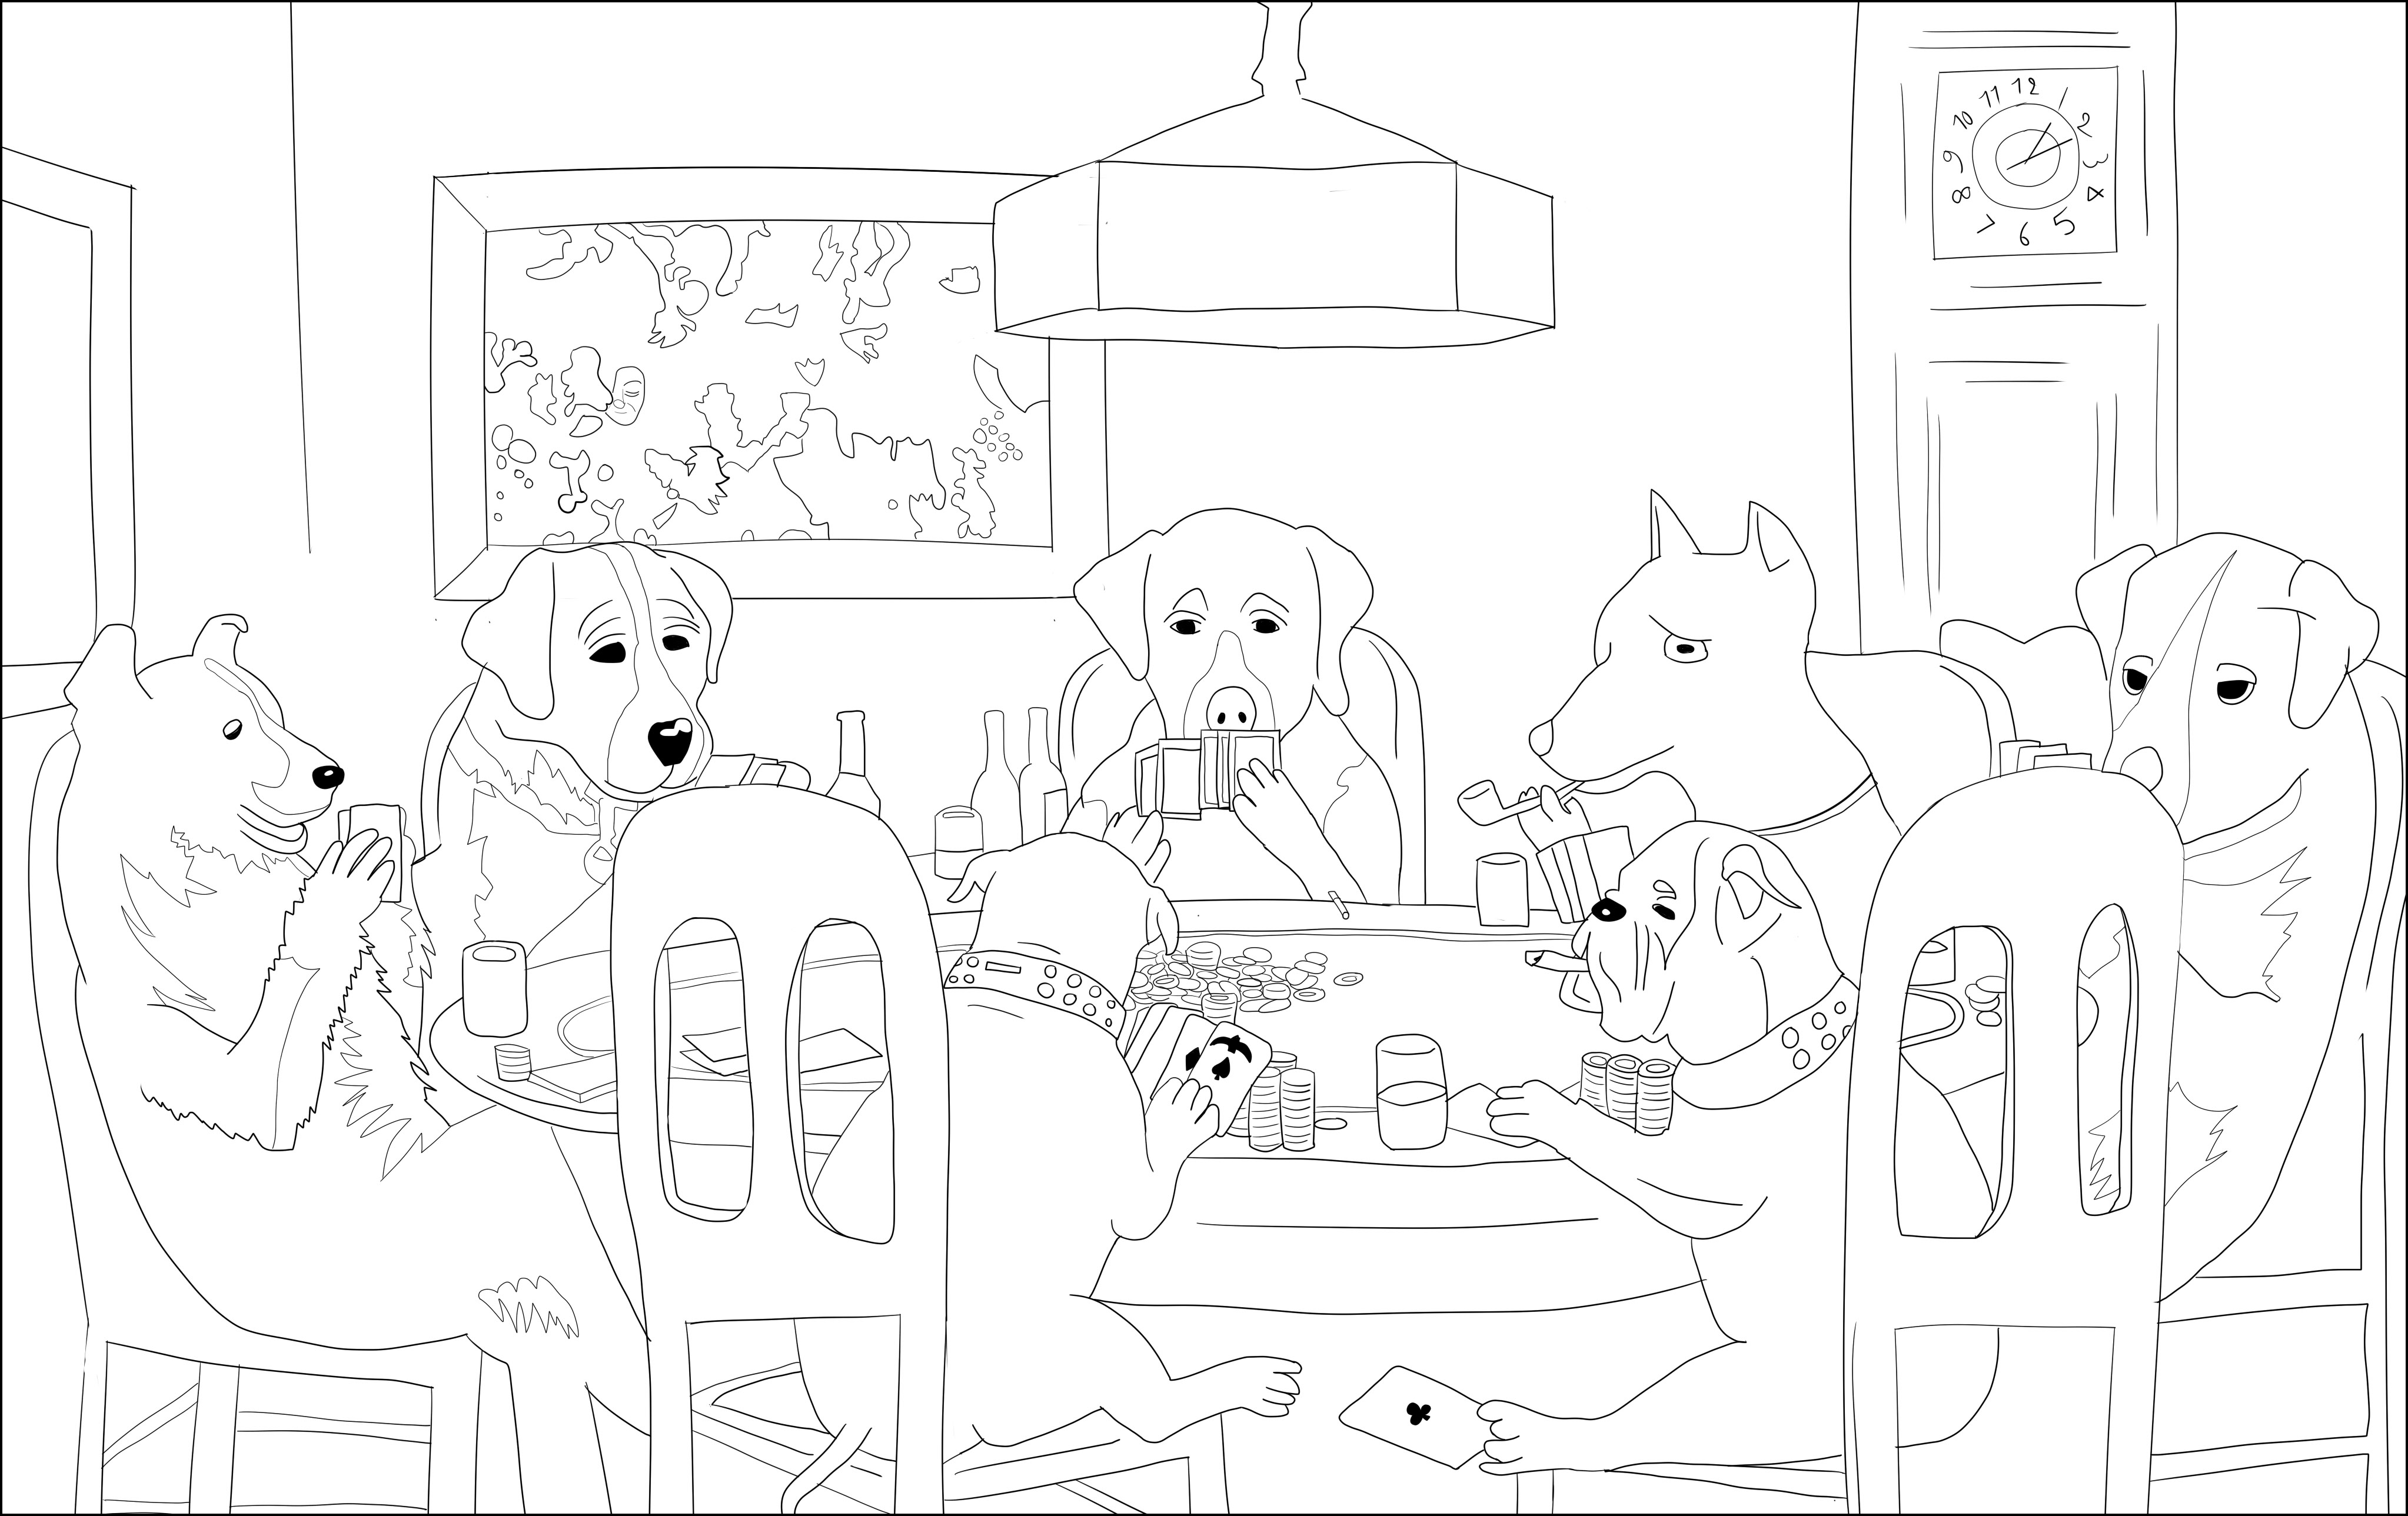 Coloring page inspired by 'A Friend in Need' by C. M. Coolidge (1903). Dogs playing poker !